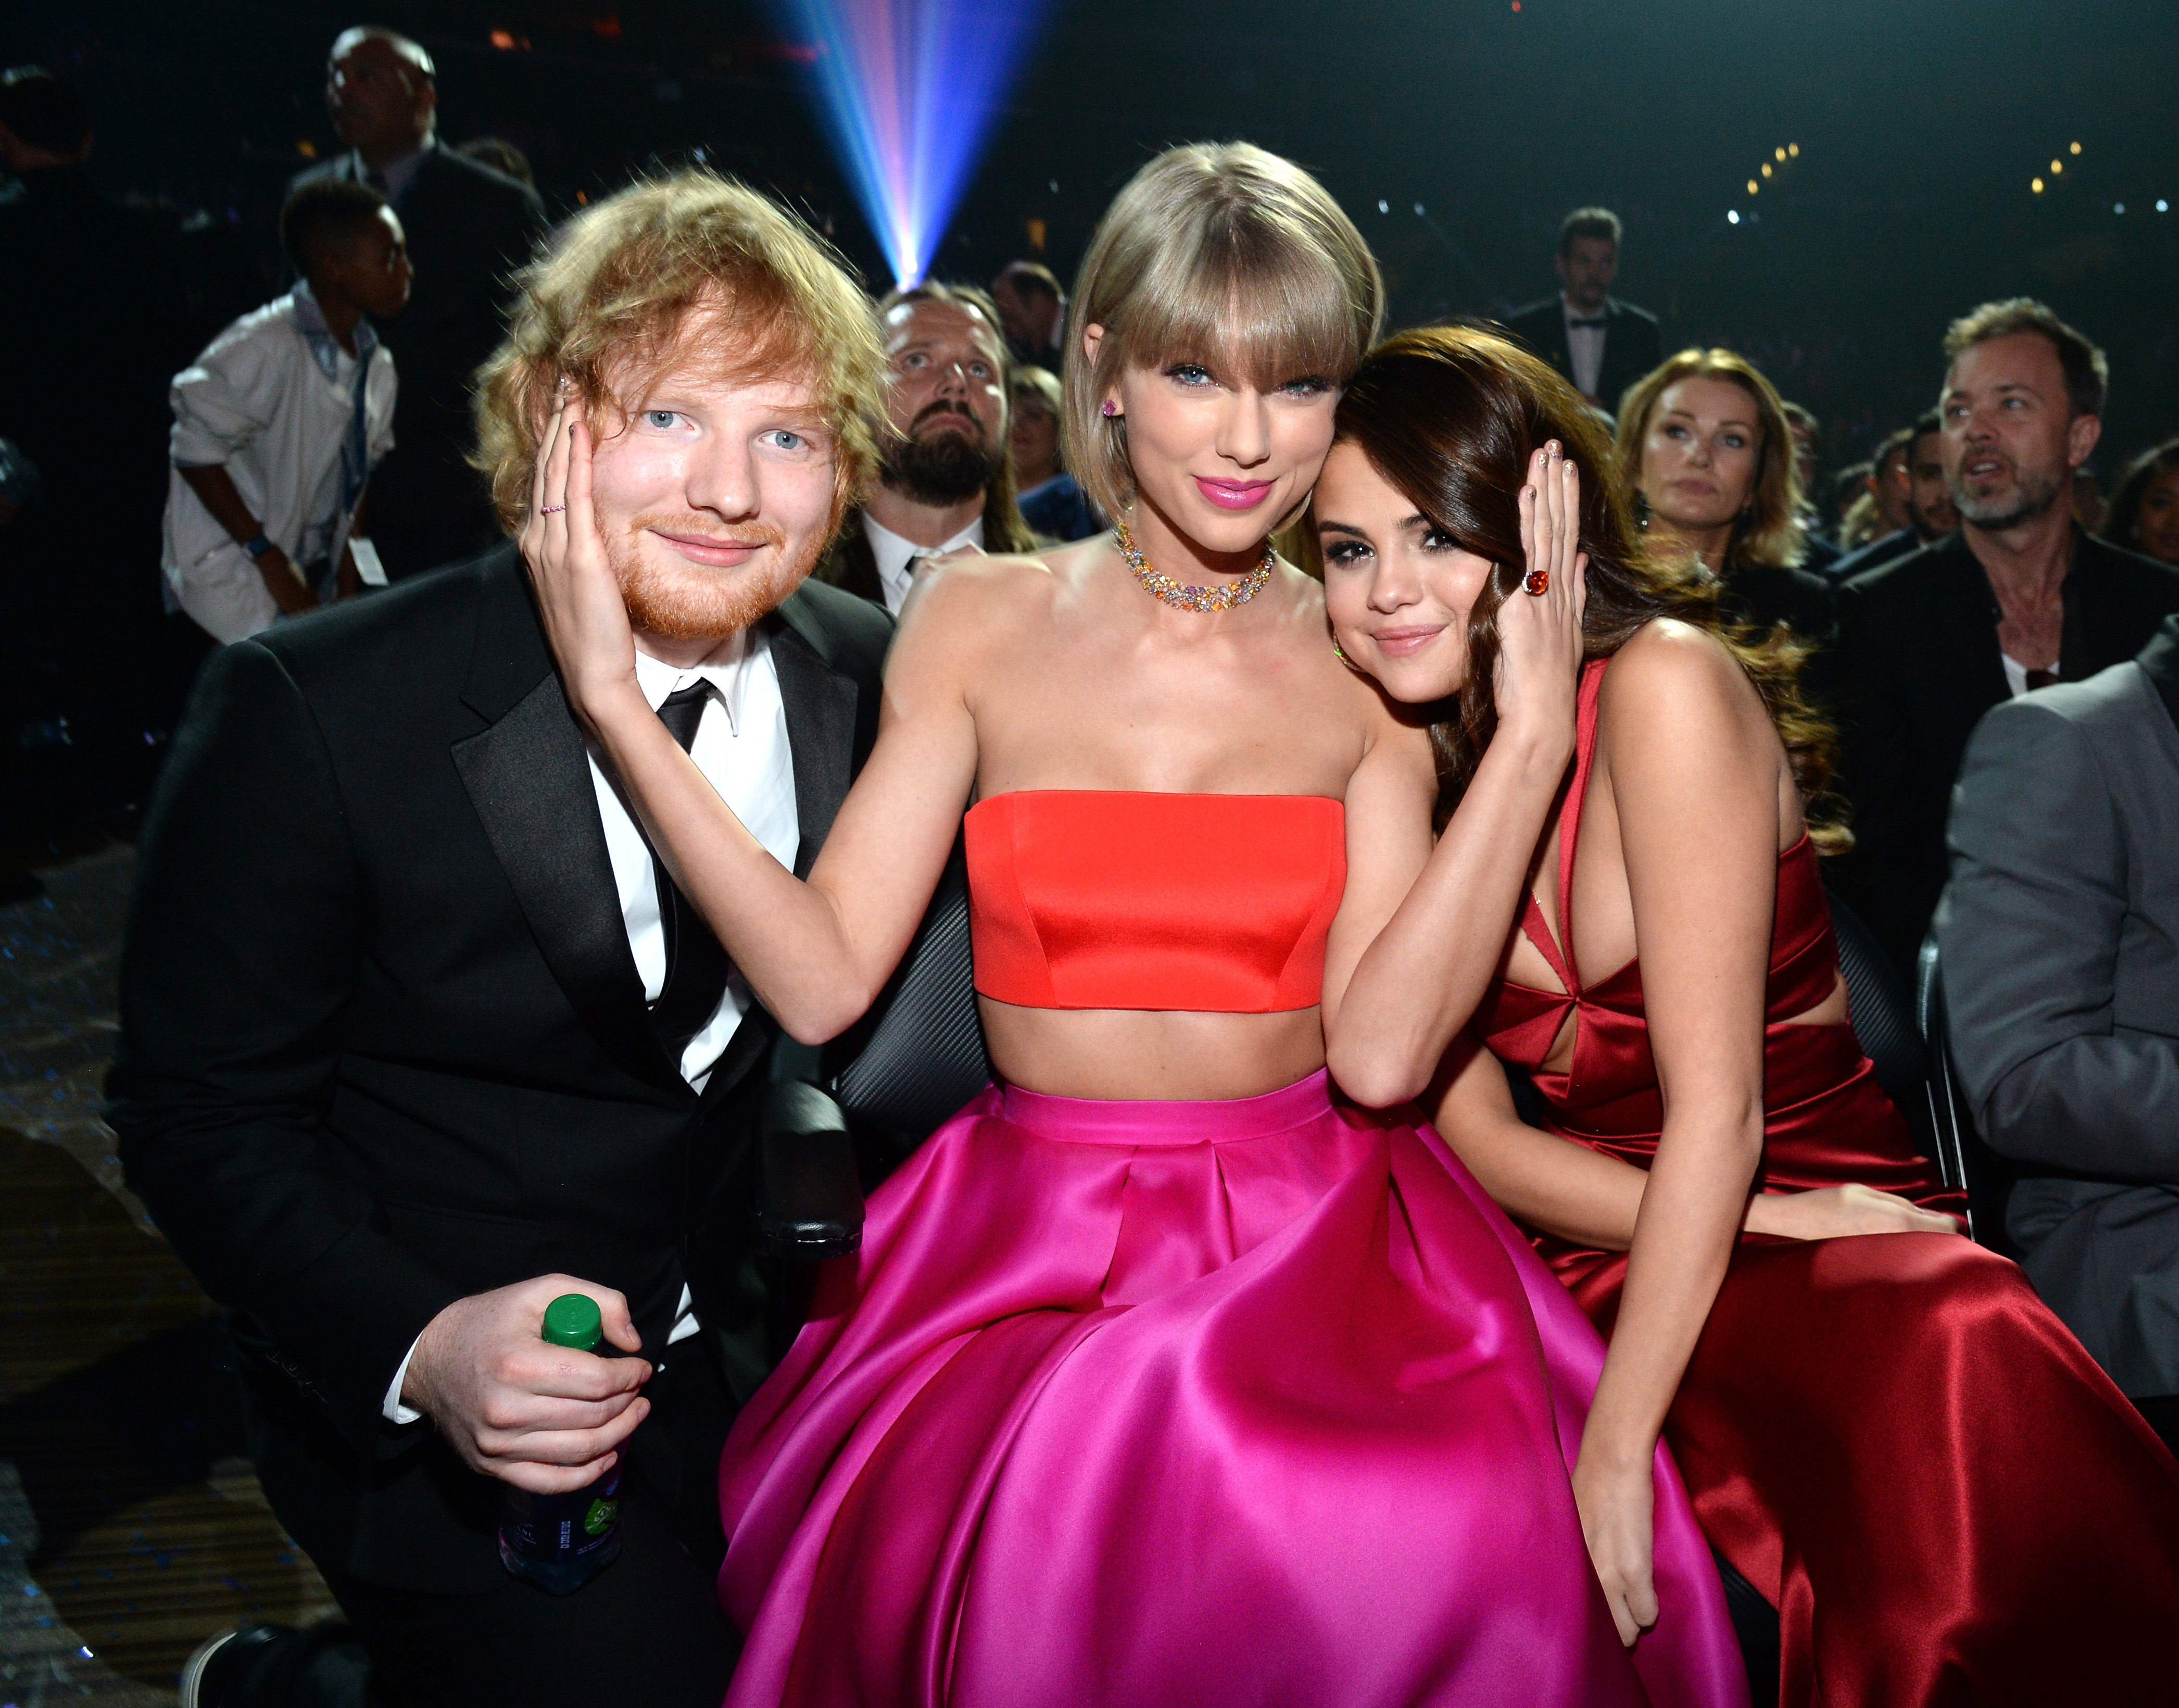 Ed Sheeran, Taylor Swift and Selena Gomez attend The 58th GRAMMY Awards at Staples Center on February 15, 2016 in Los Angeles, California. (Kevin Mazur—WireImage/Getty Images)